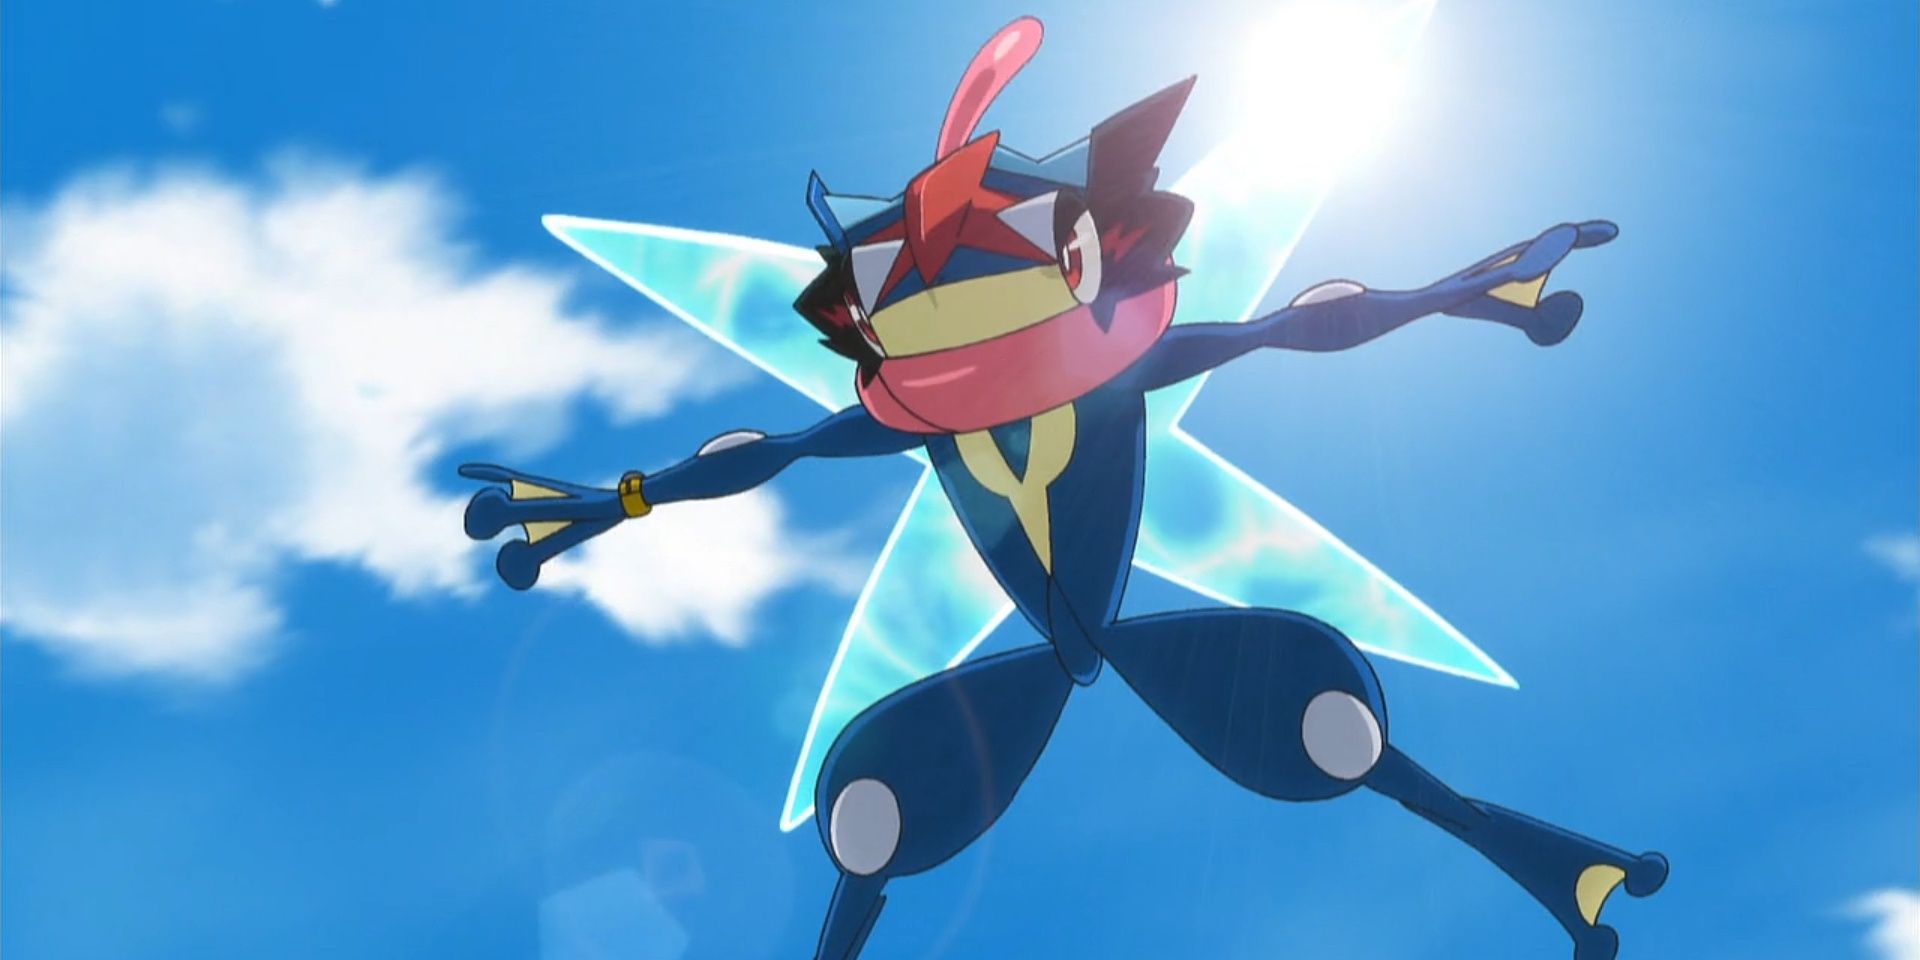 Ash-Greninja jumps and prepares to attack in the Pokemon anime